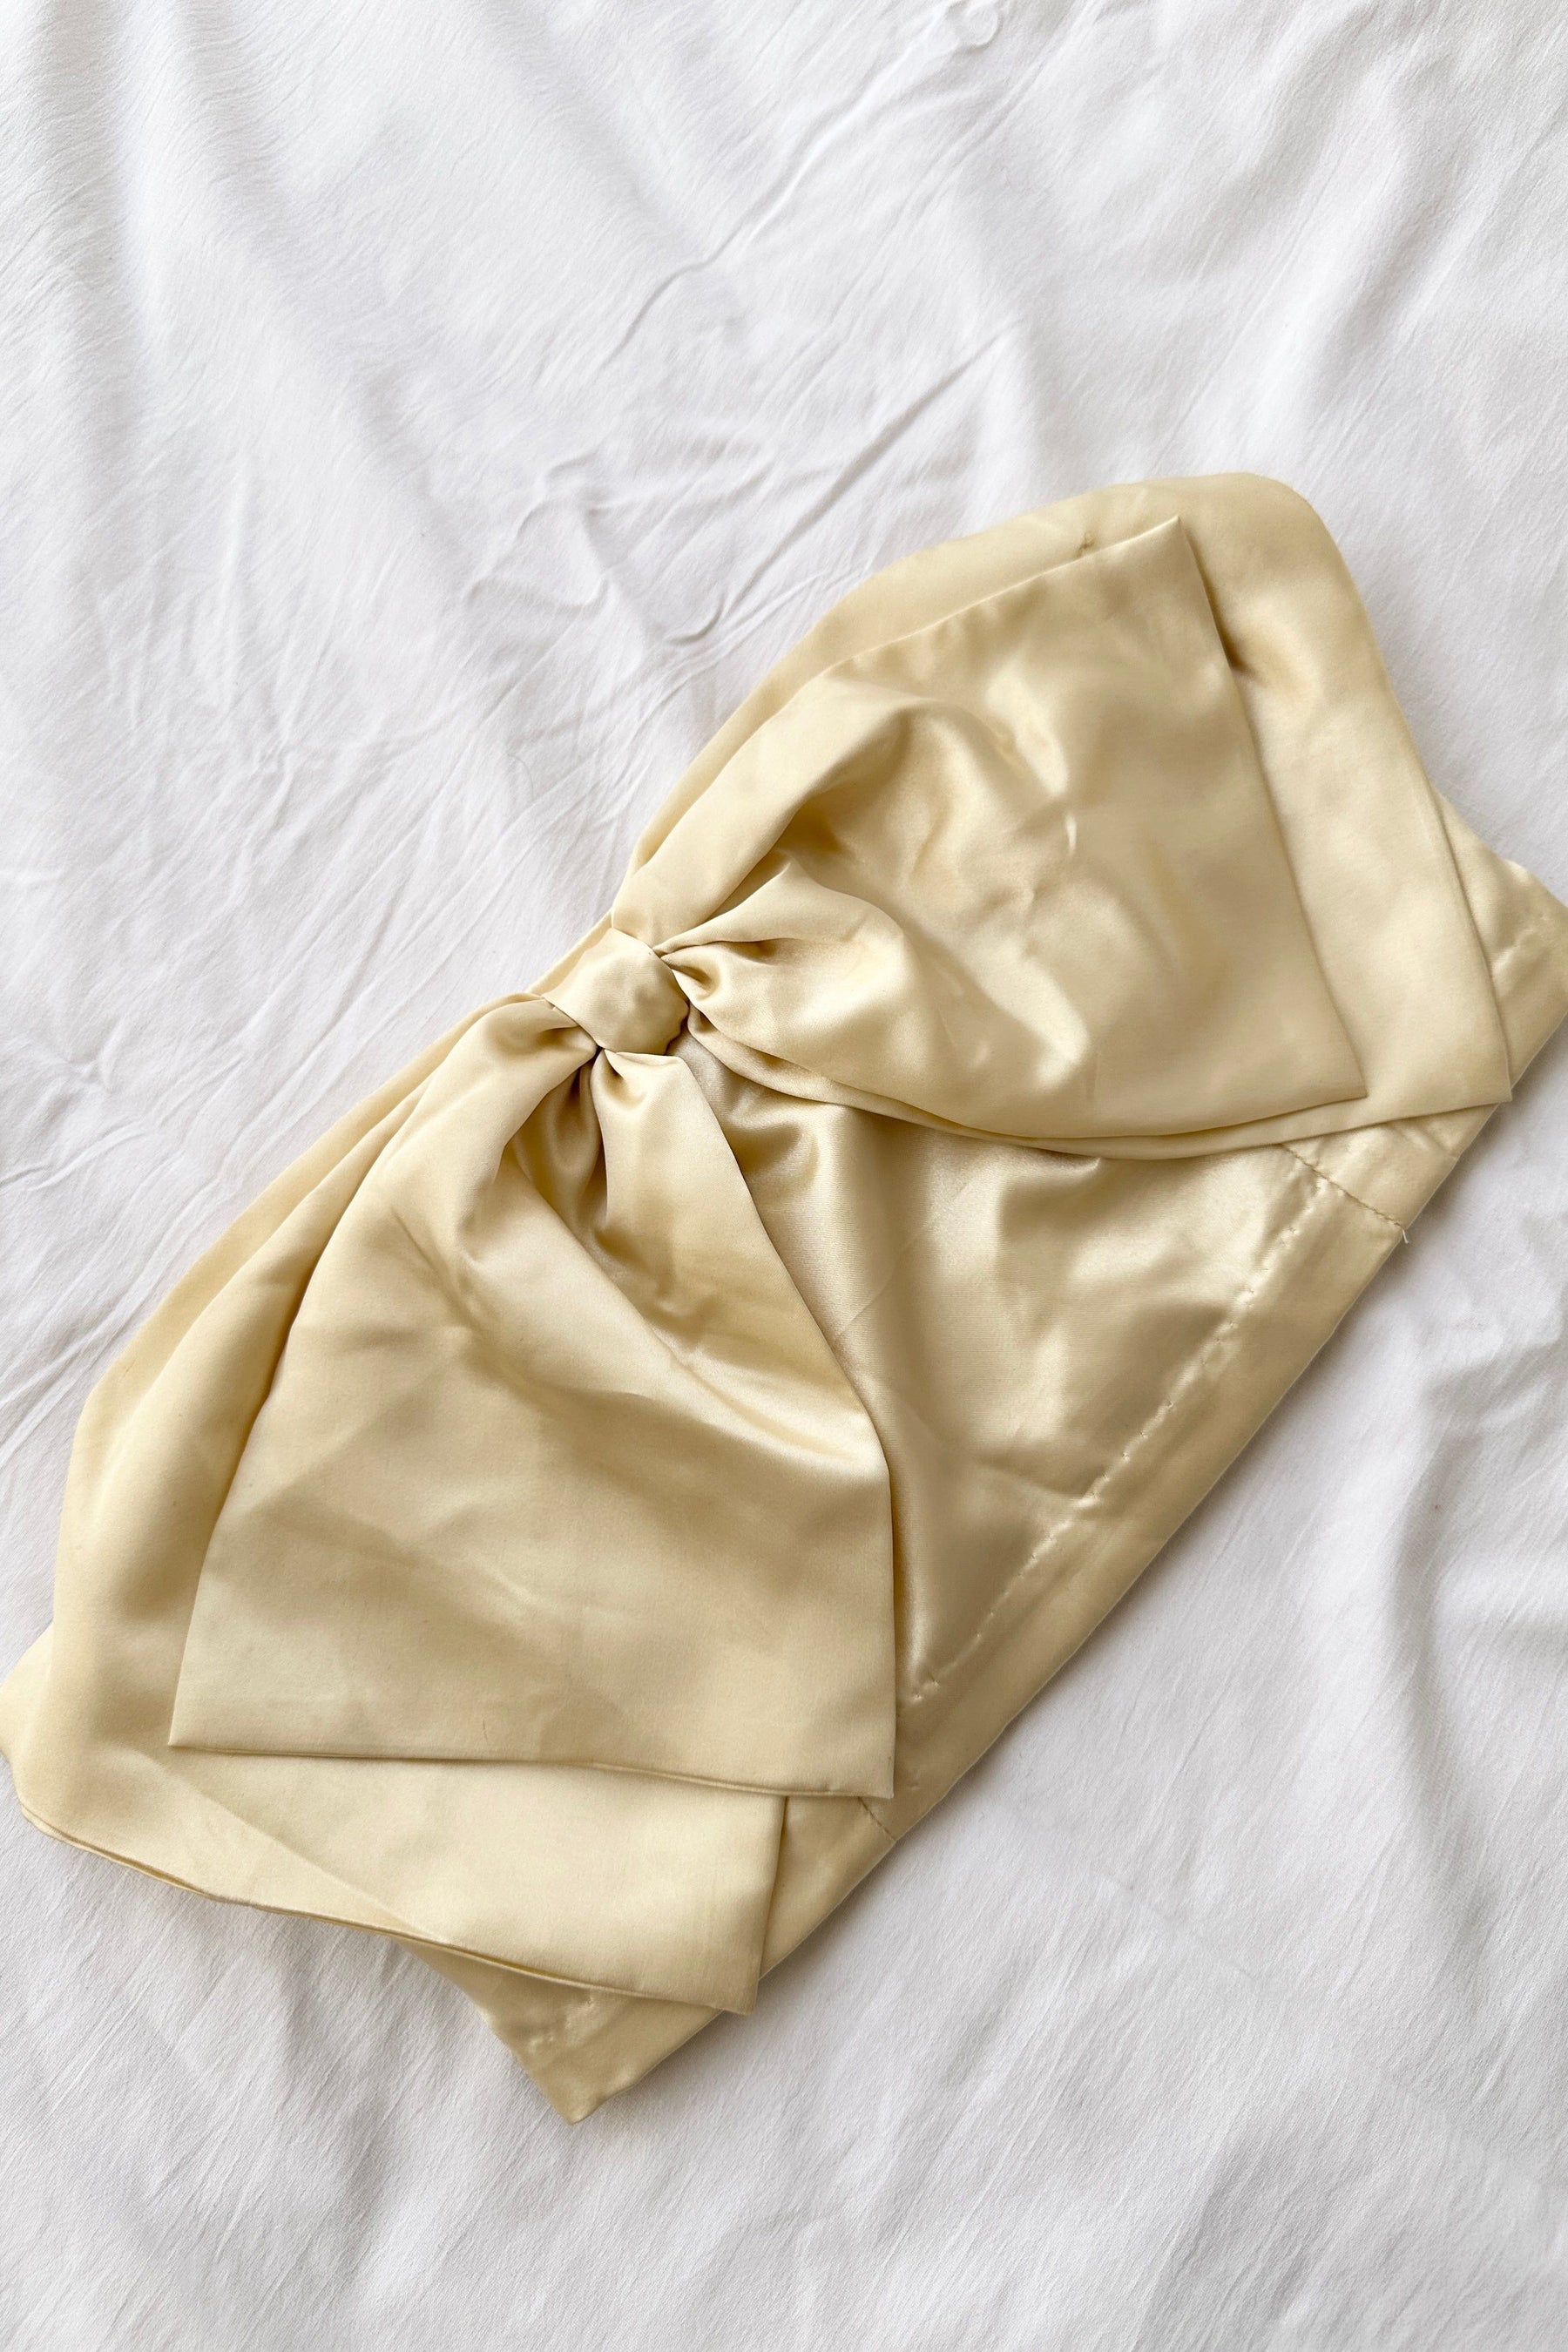 Champagne Bow Top